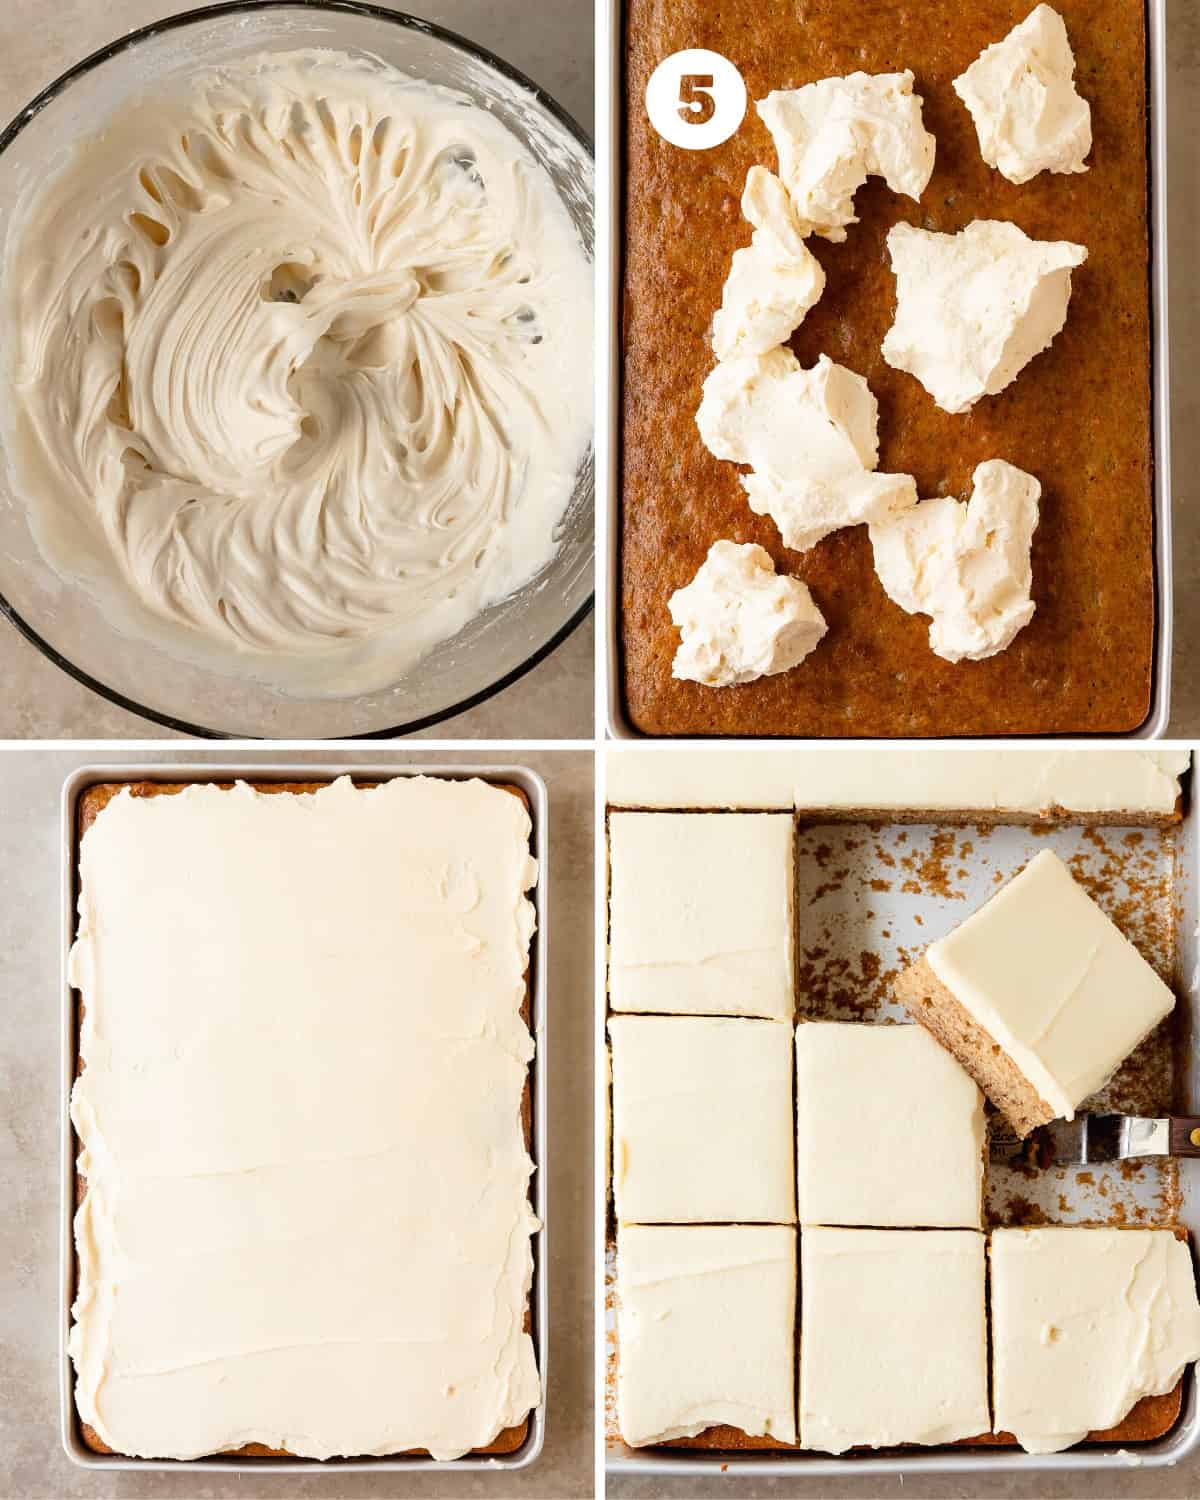 Spread the cream cheese frosting on top of the fully cooled banana sheet cake bars. If the frosting is too warm or soft, place the frosted banana bars in the fridge for 20-30 minutes. Slice and enjoy!